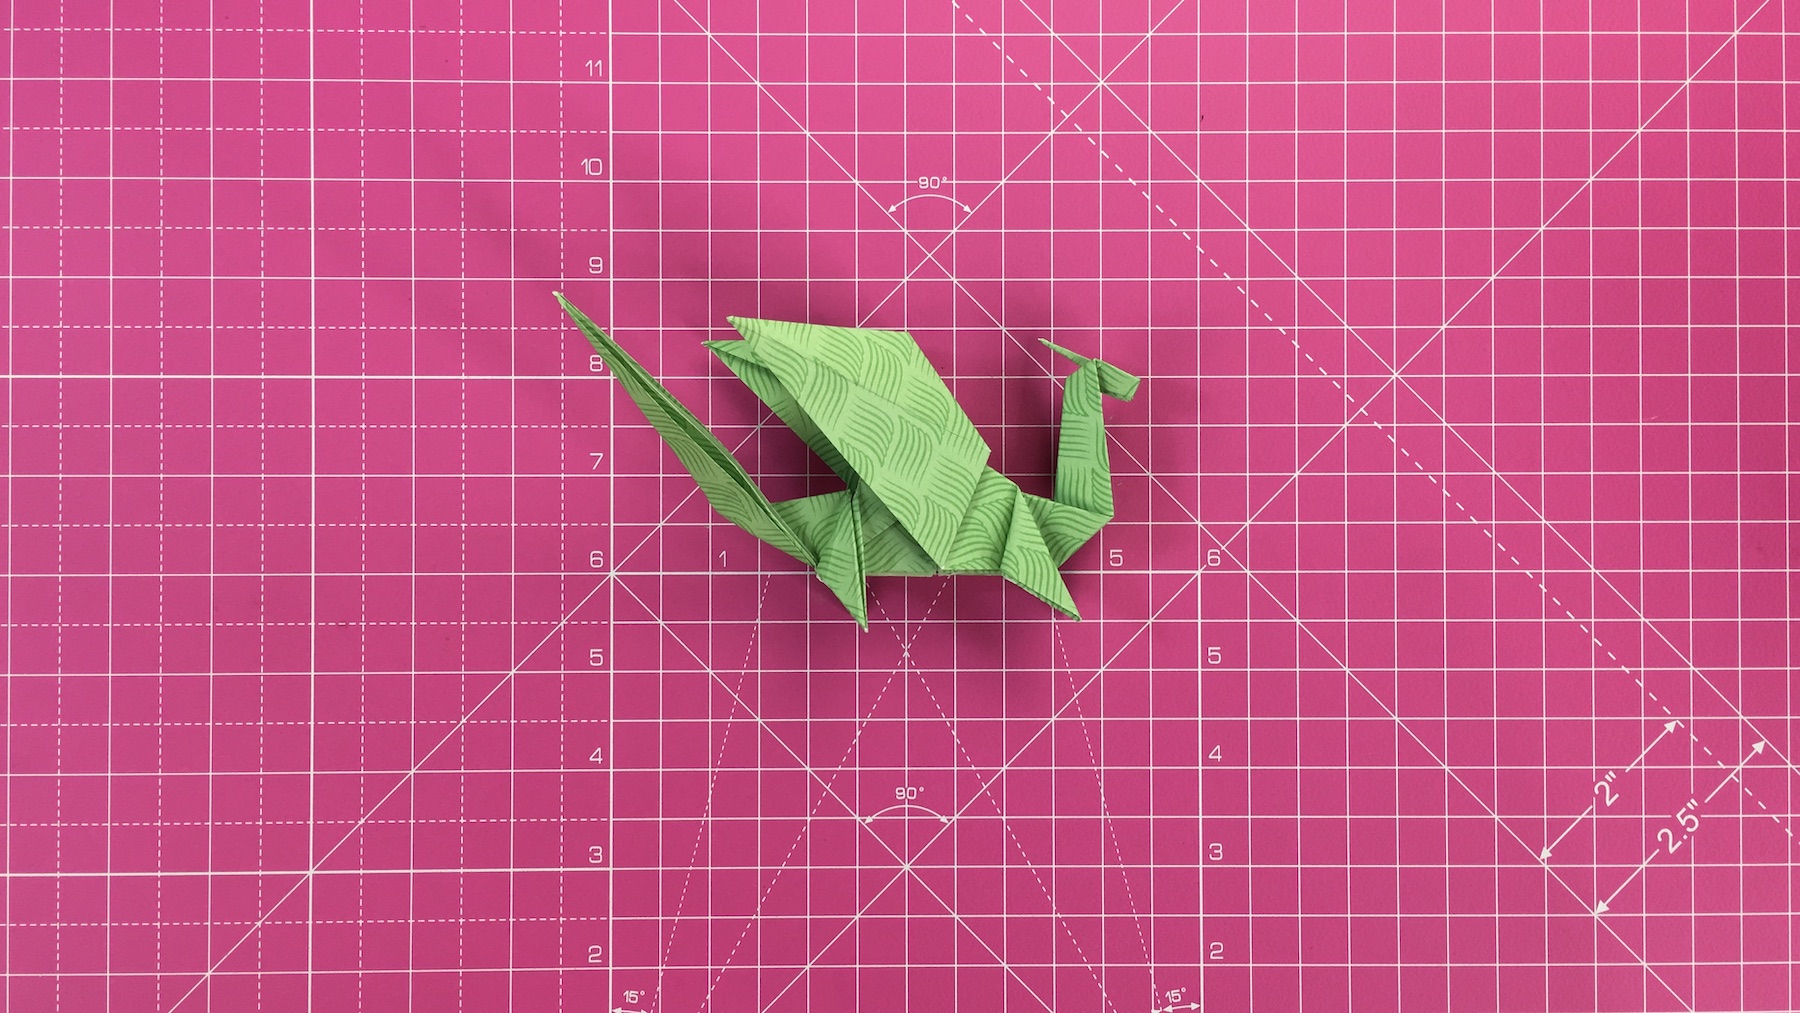 How to make an origami dragon, origami dragon tutorial - step 52